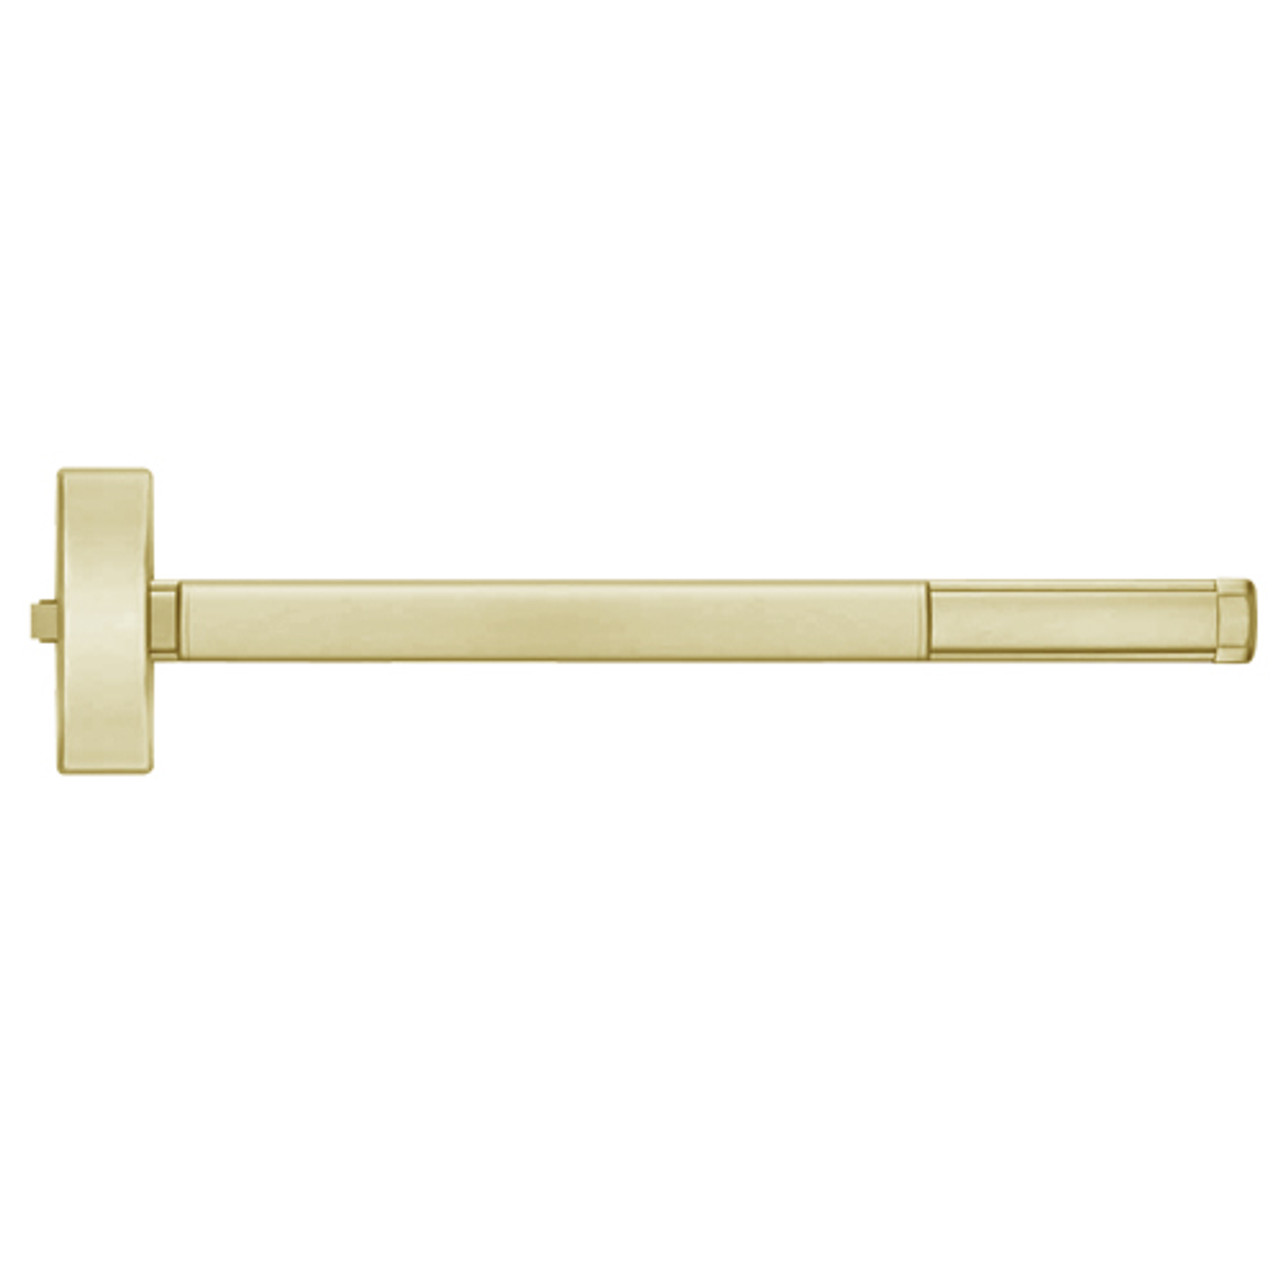 FL2108-606-48 PHI 2100 Series Fire Rated Apex Rim Exit Device Prepped for Key Controls Lever/Knob in Satin Brass Finish